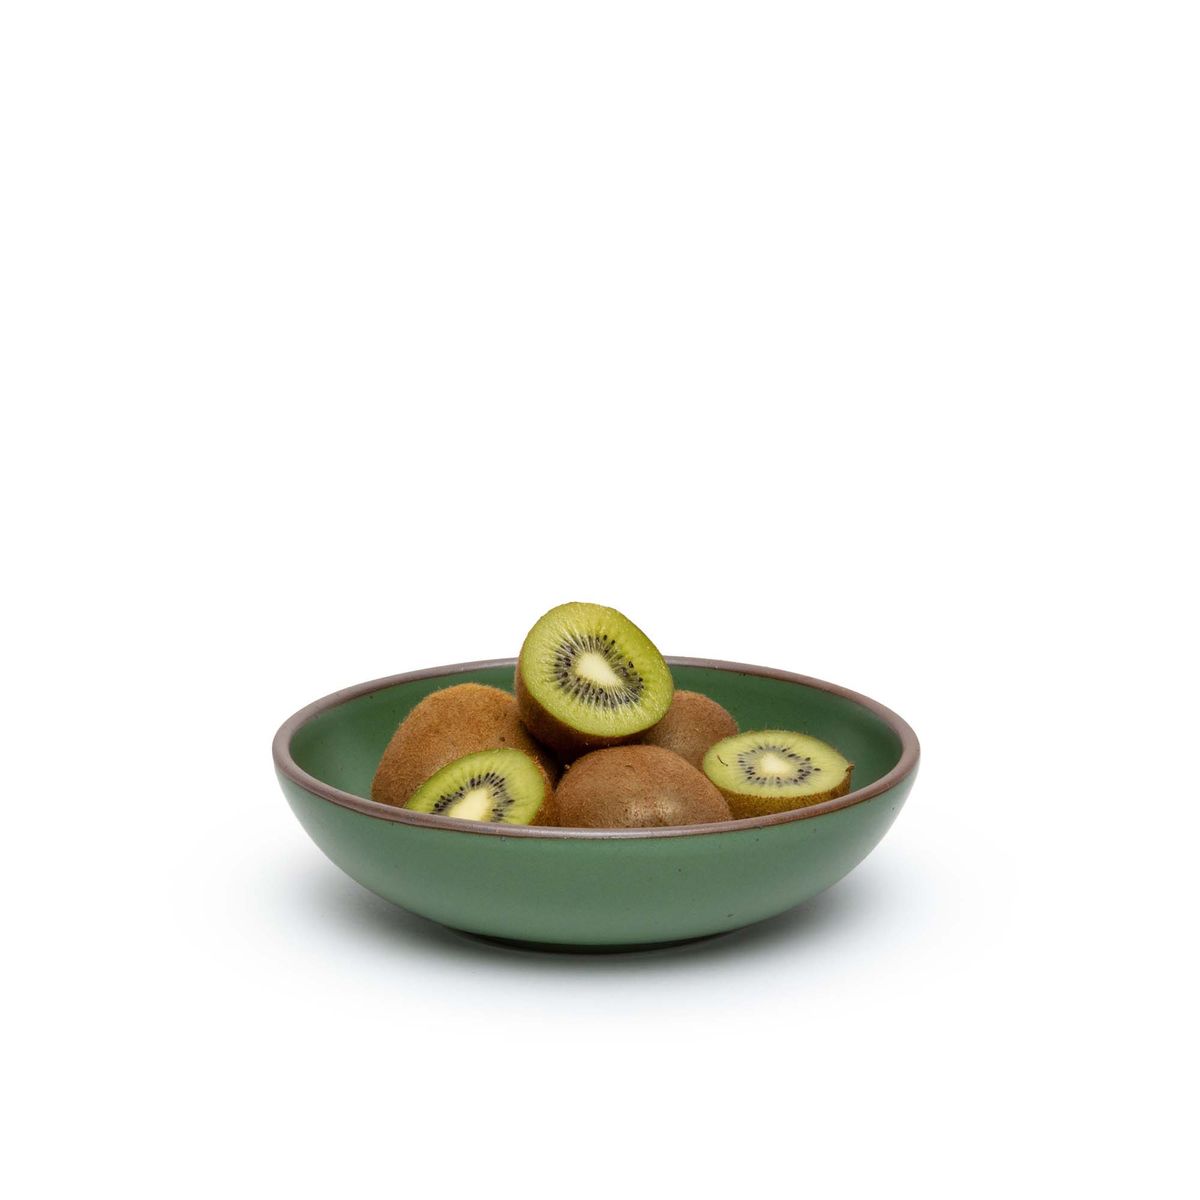 A dinner-sized shallow ceramic bowl in a deep, verdant green color featuring iron speckles and an unglazed rim, filled with sliced kiwis